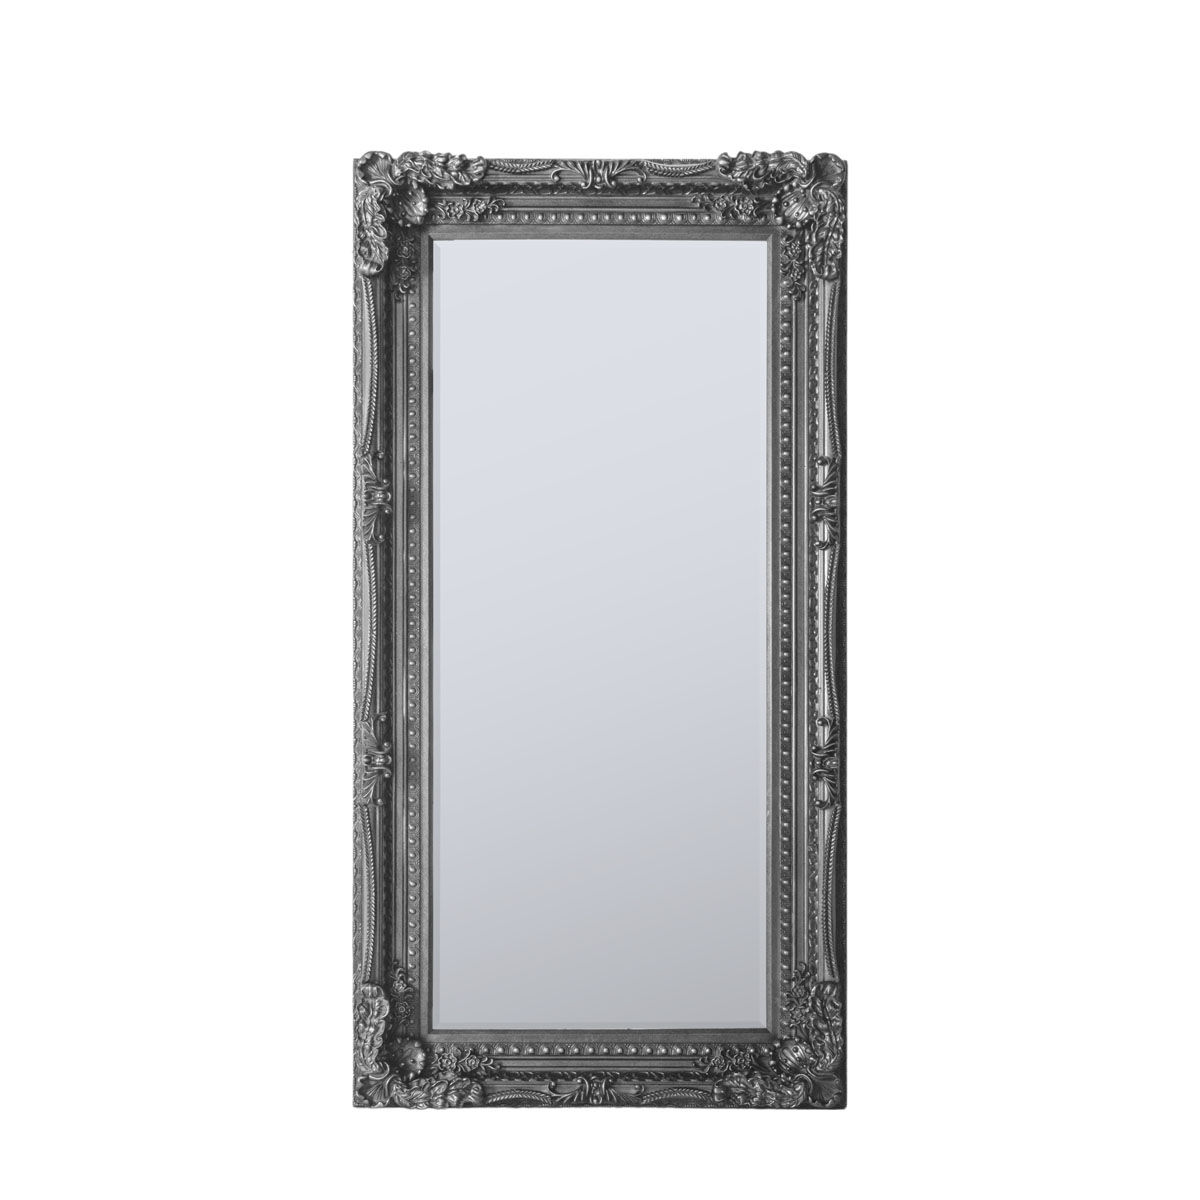 Carved Louis Leaner Mirror Silver 1755x895mm